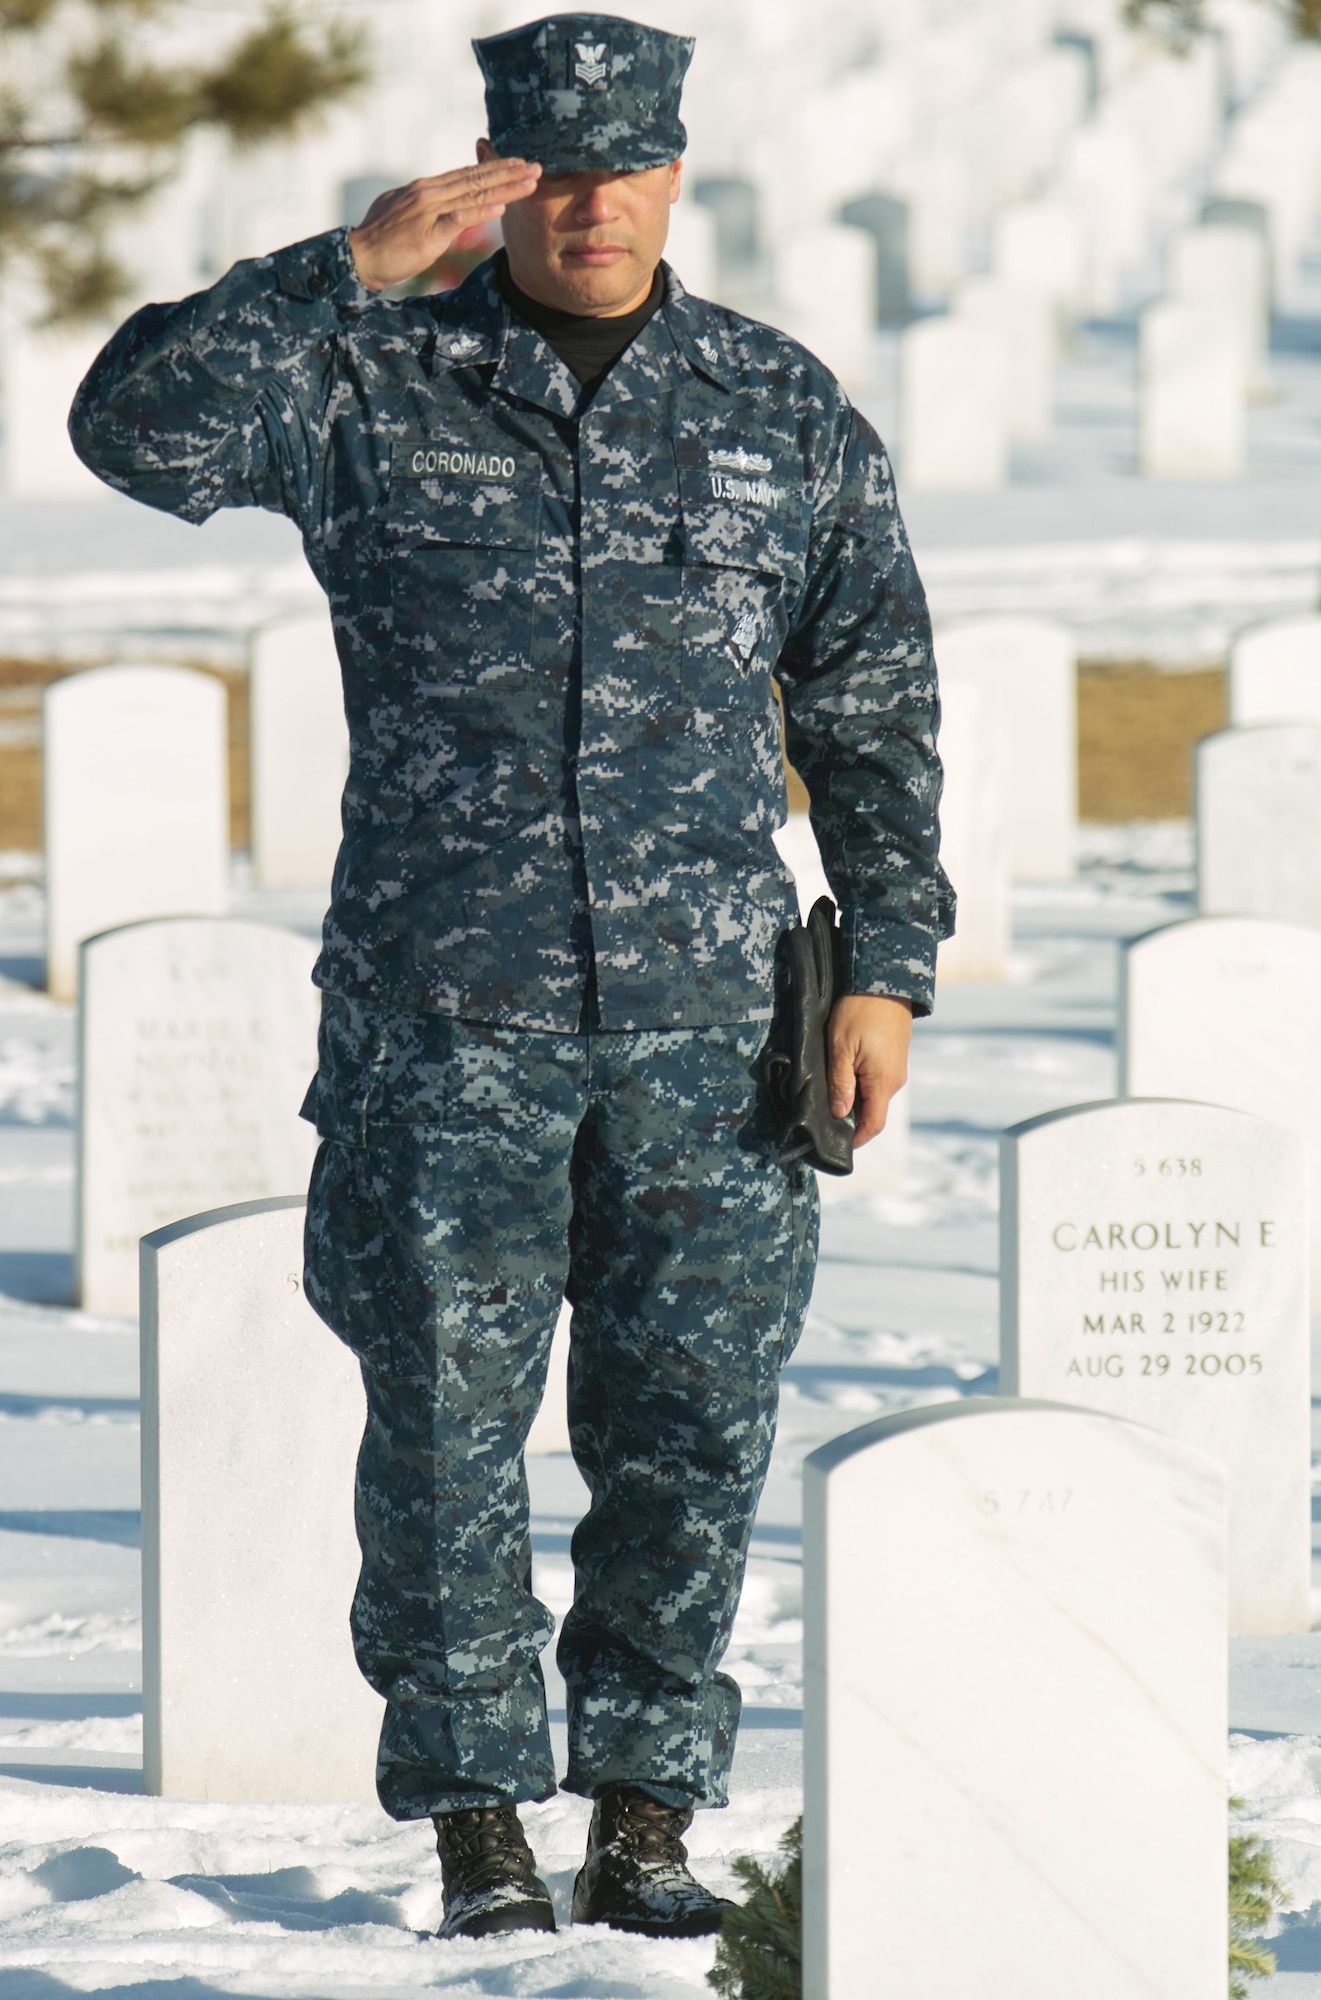 Petty Officer First Class Manuel Coronado, Navy Information Operations Command Colorado, salutes after placing a wreath on a veteran's grave Dec. 12. (U.S. Air Force photo by Master Sgt. Steven Clark)